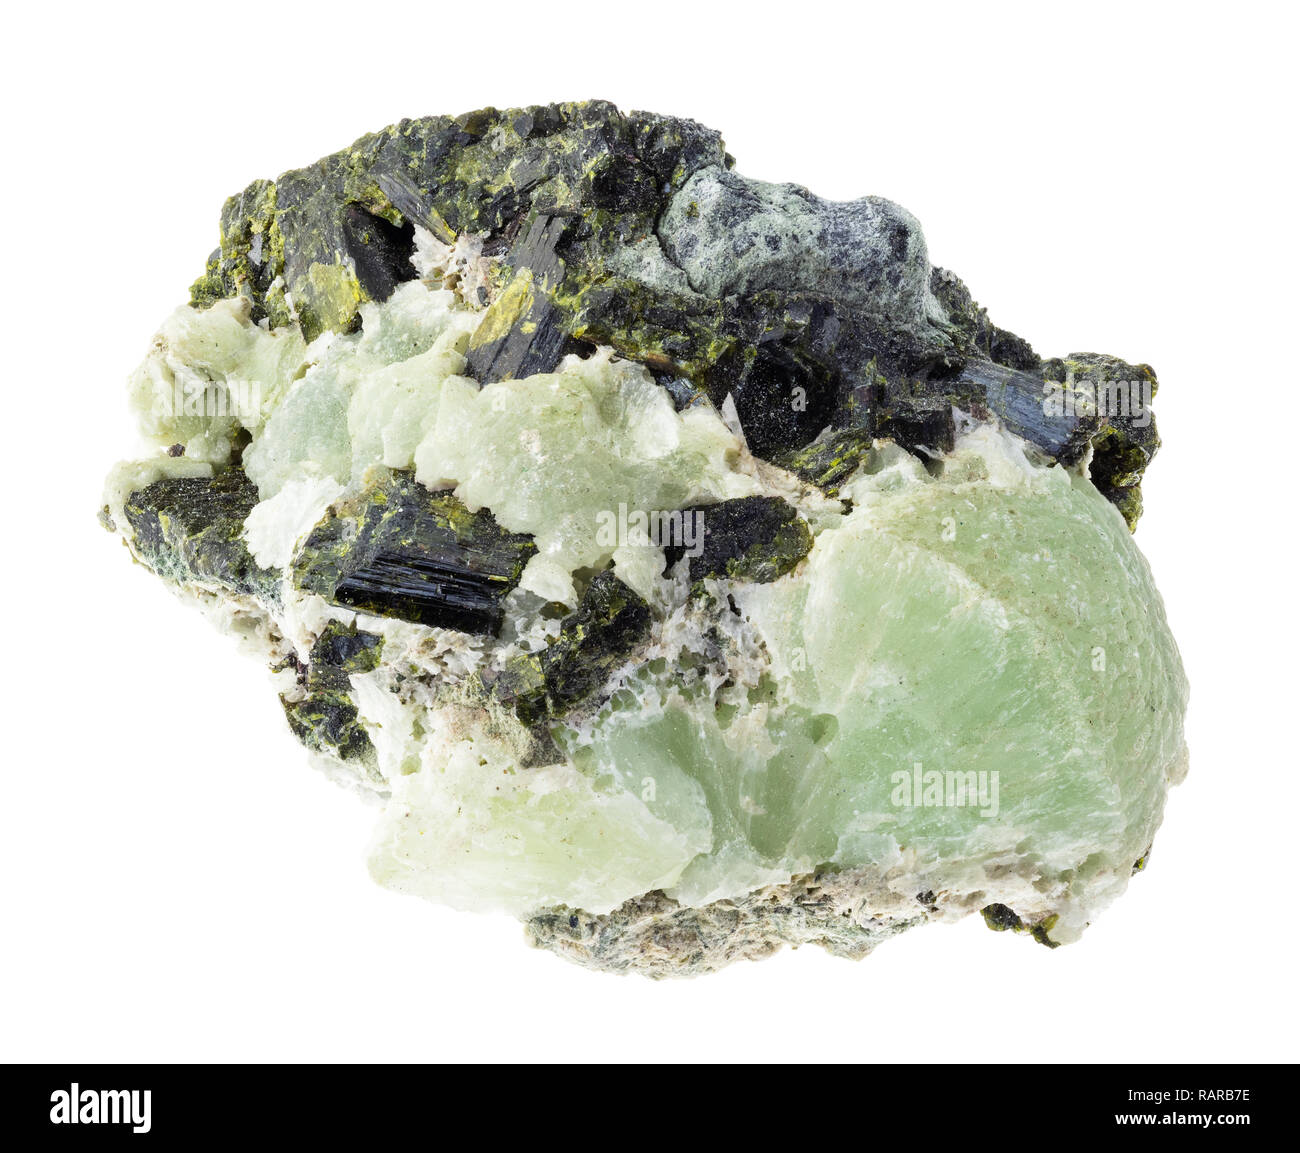 macro photography of natural mineral from geological collection - Prehnite rough stones in Epidote matrix on white background Stock Photo